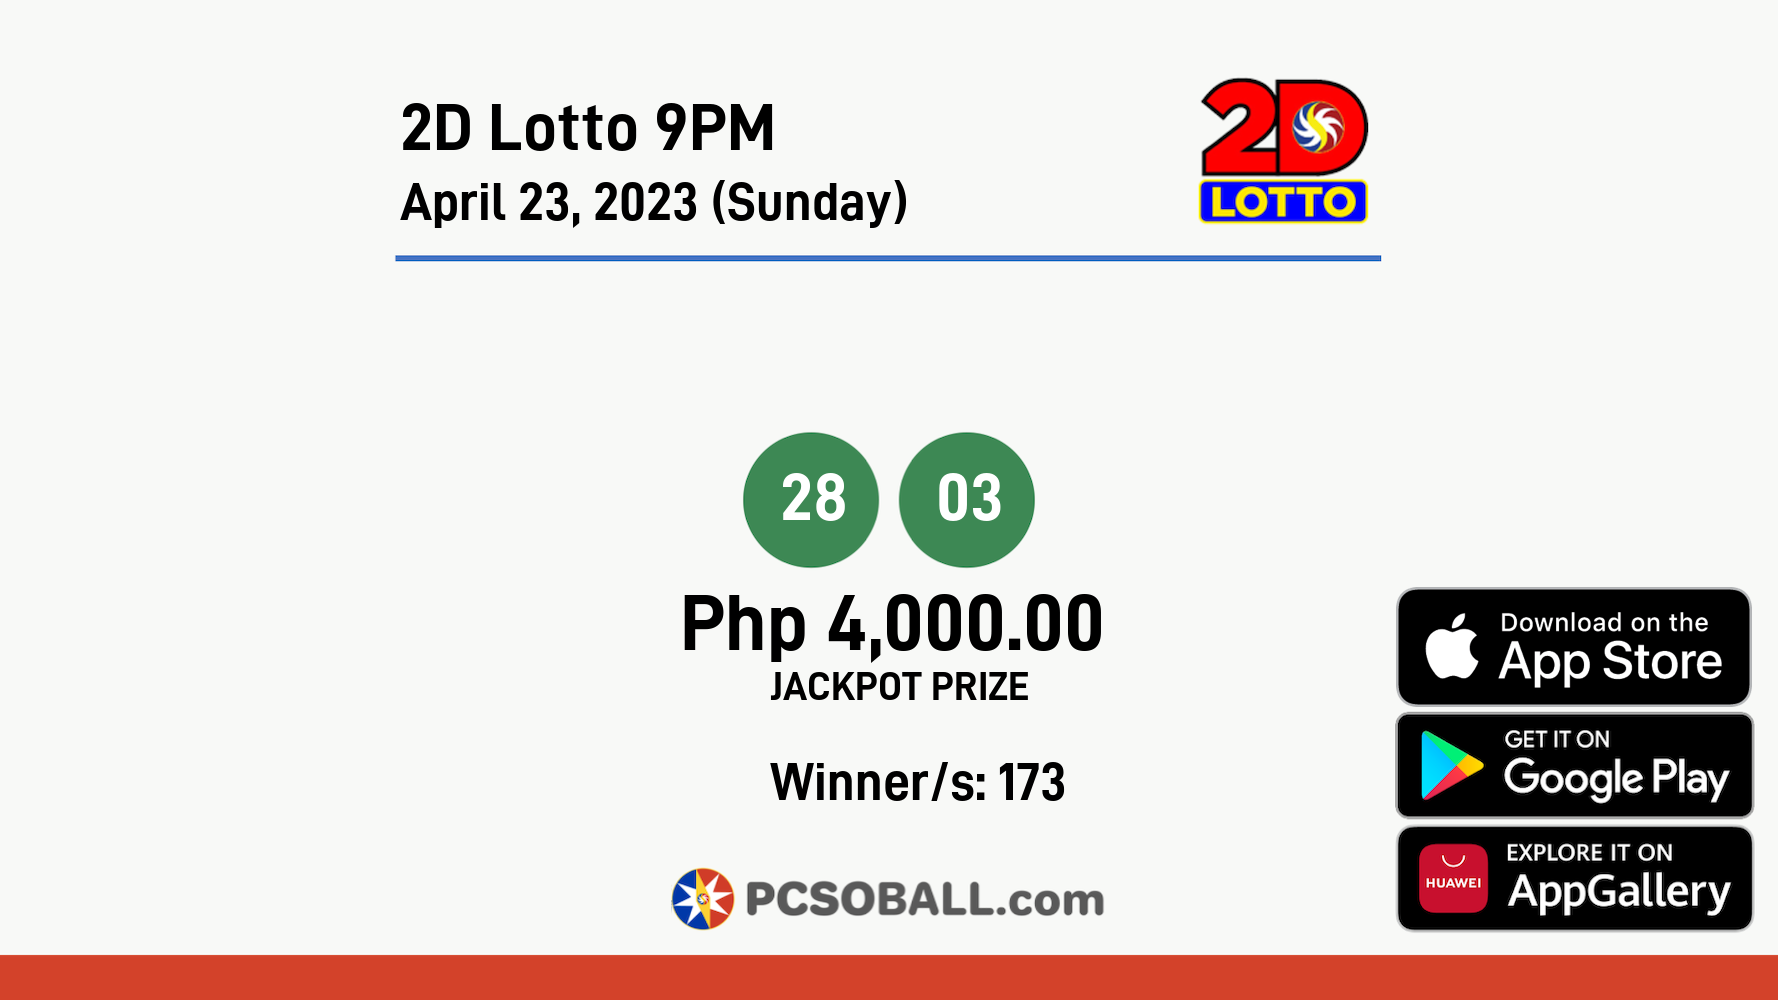 2D Lotto 9PM April 23, 2023 (Sunday) Result